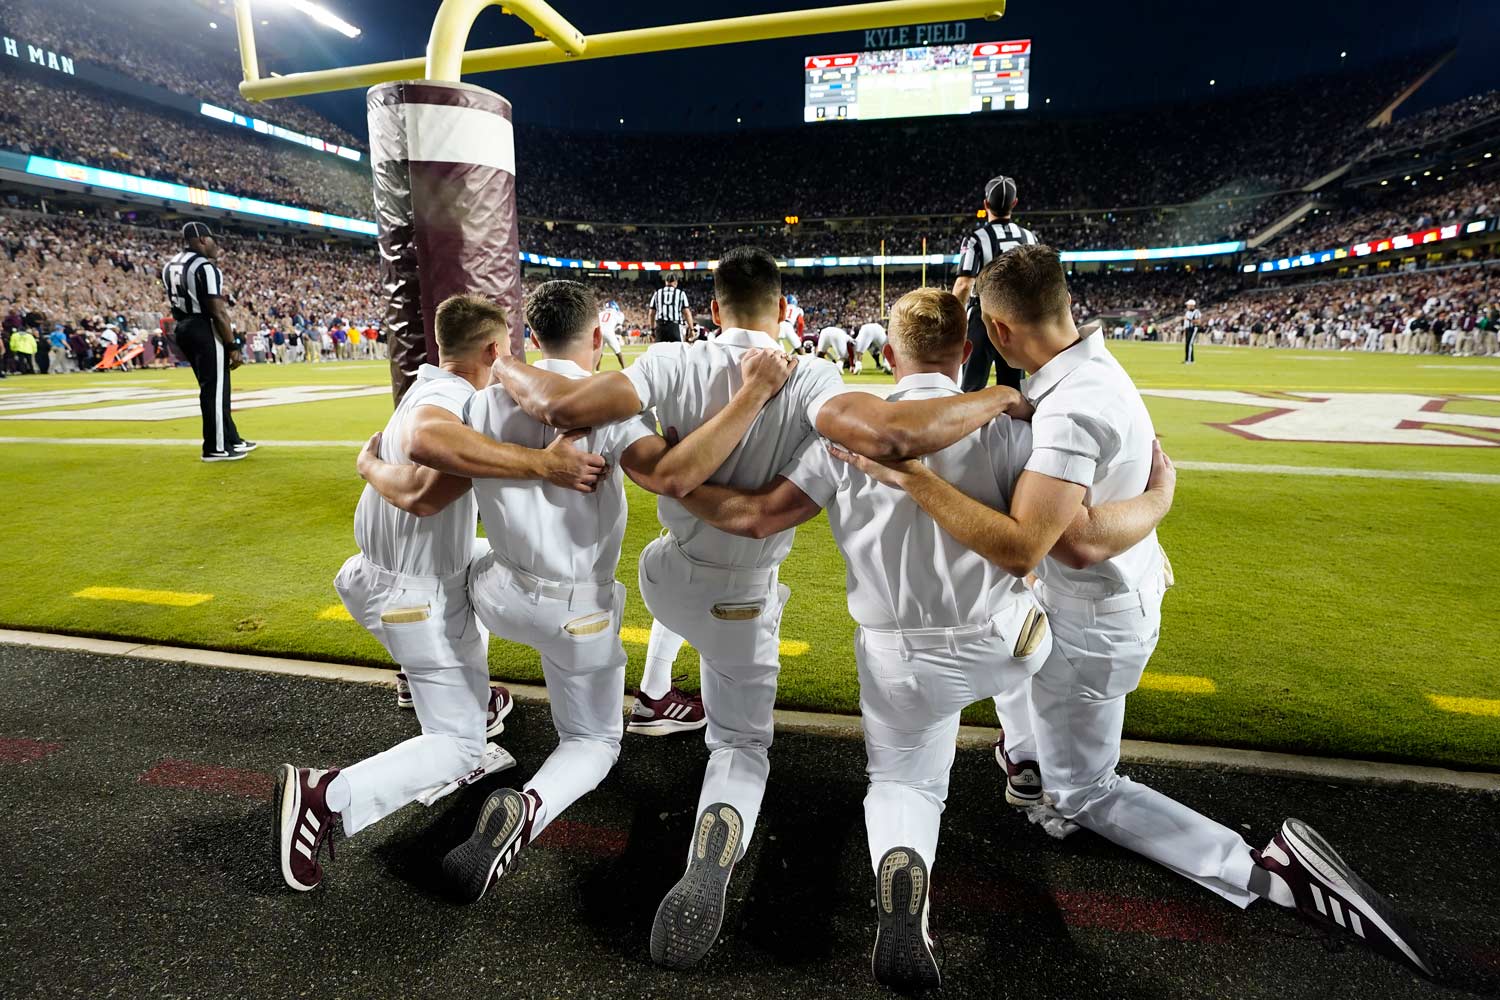 The ϲʹ̳ Yell leaders prep for kickoff in the endzone of Kyle Field